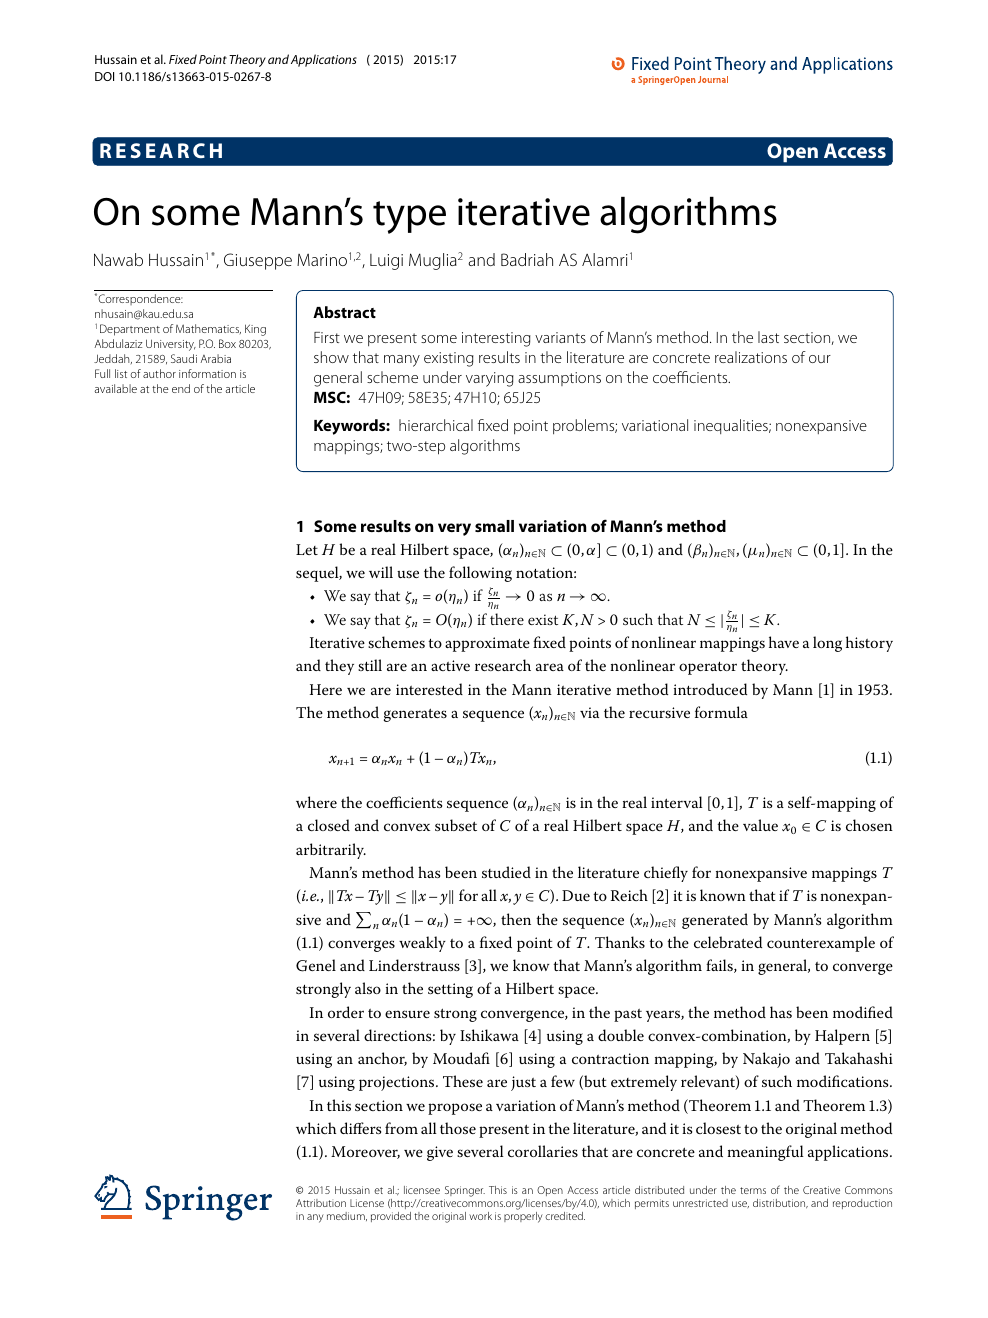 On Some Mann S Type Iterative Algorithms Topic Of Research Paper In Mathematics Download Scholarly Article Pdf And Read For Free On Cyberleninka Open Science Hub